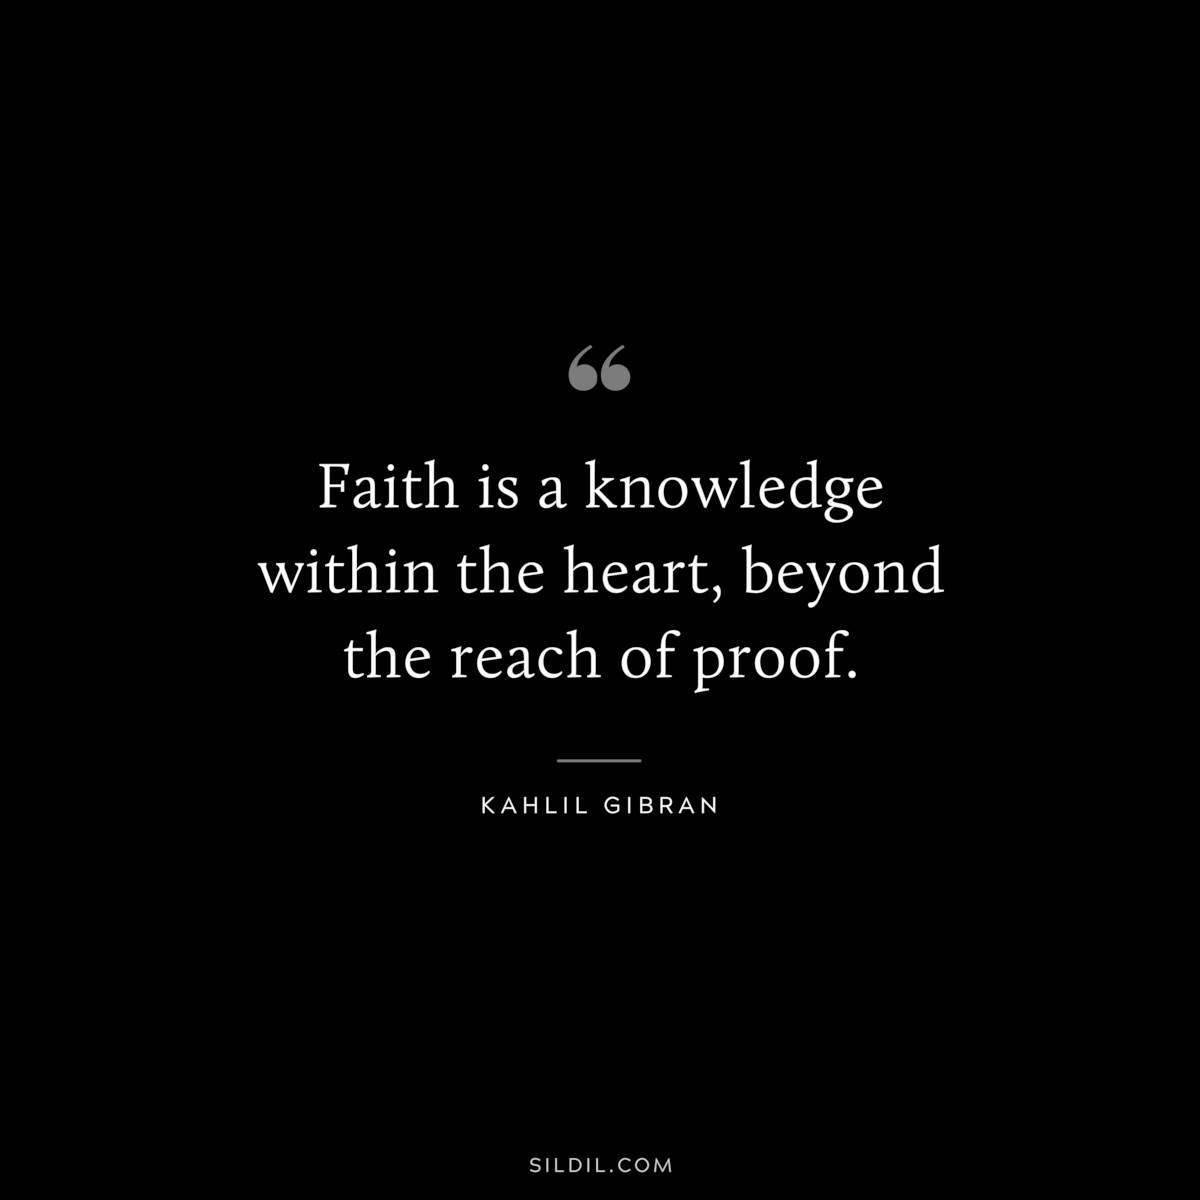 Faith is a knowledge within the heart, beyond the reach of proof. ― Kahlil Gibran